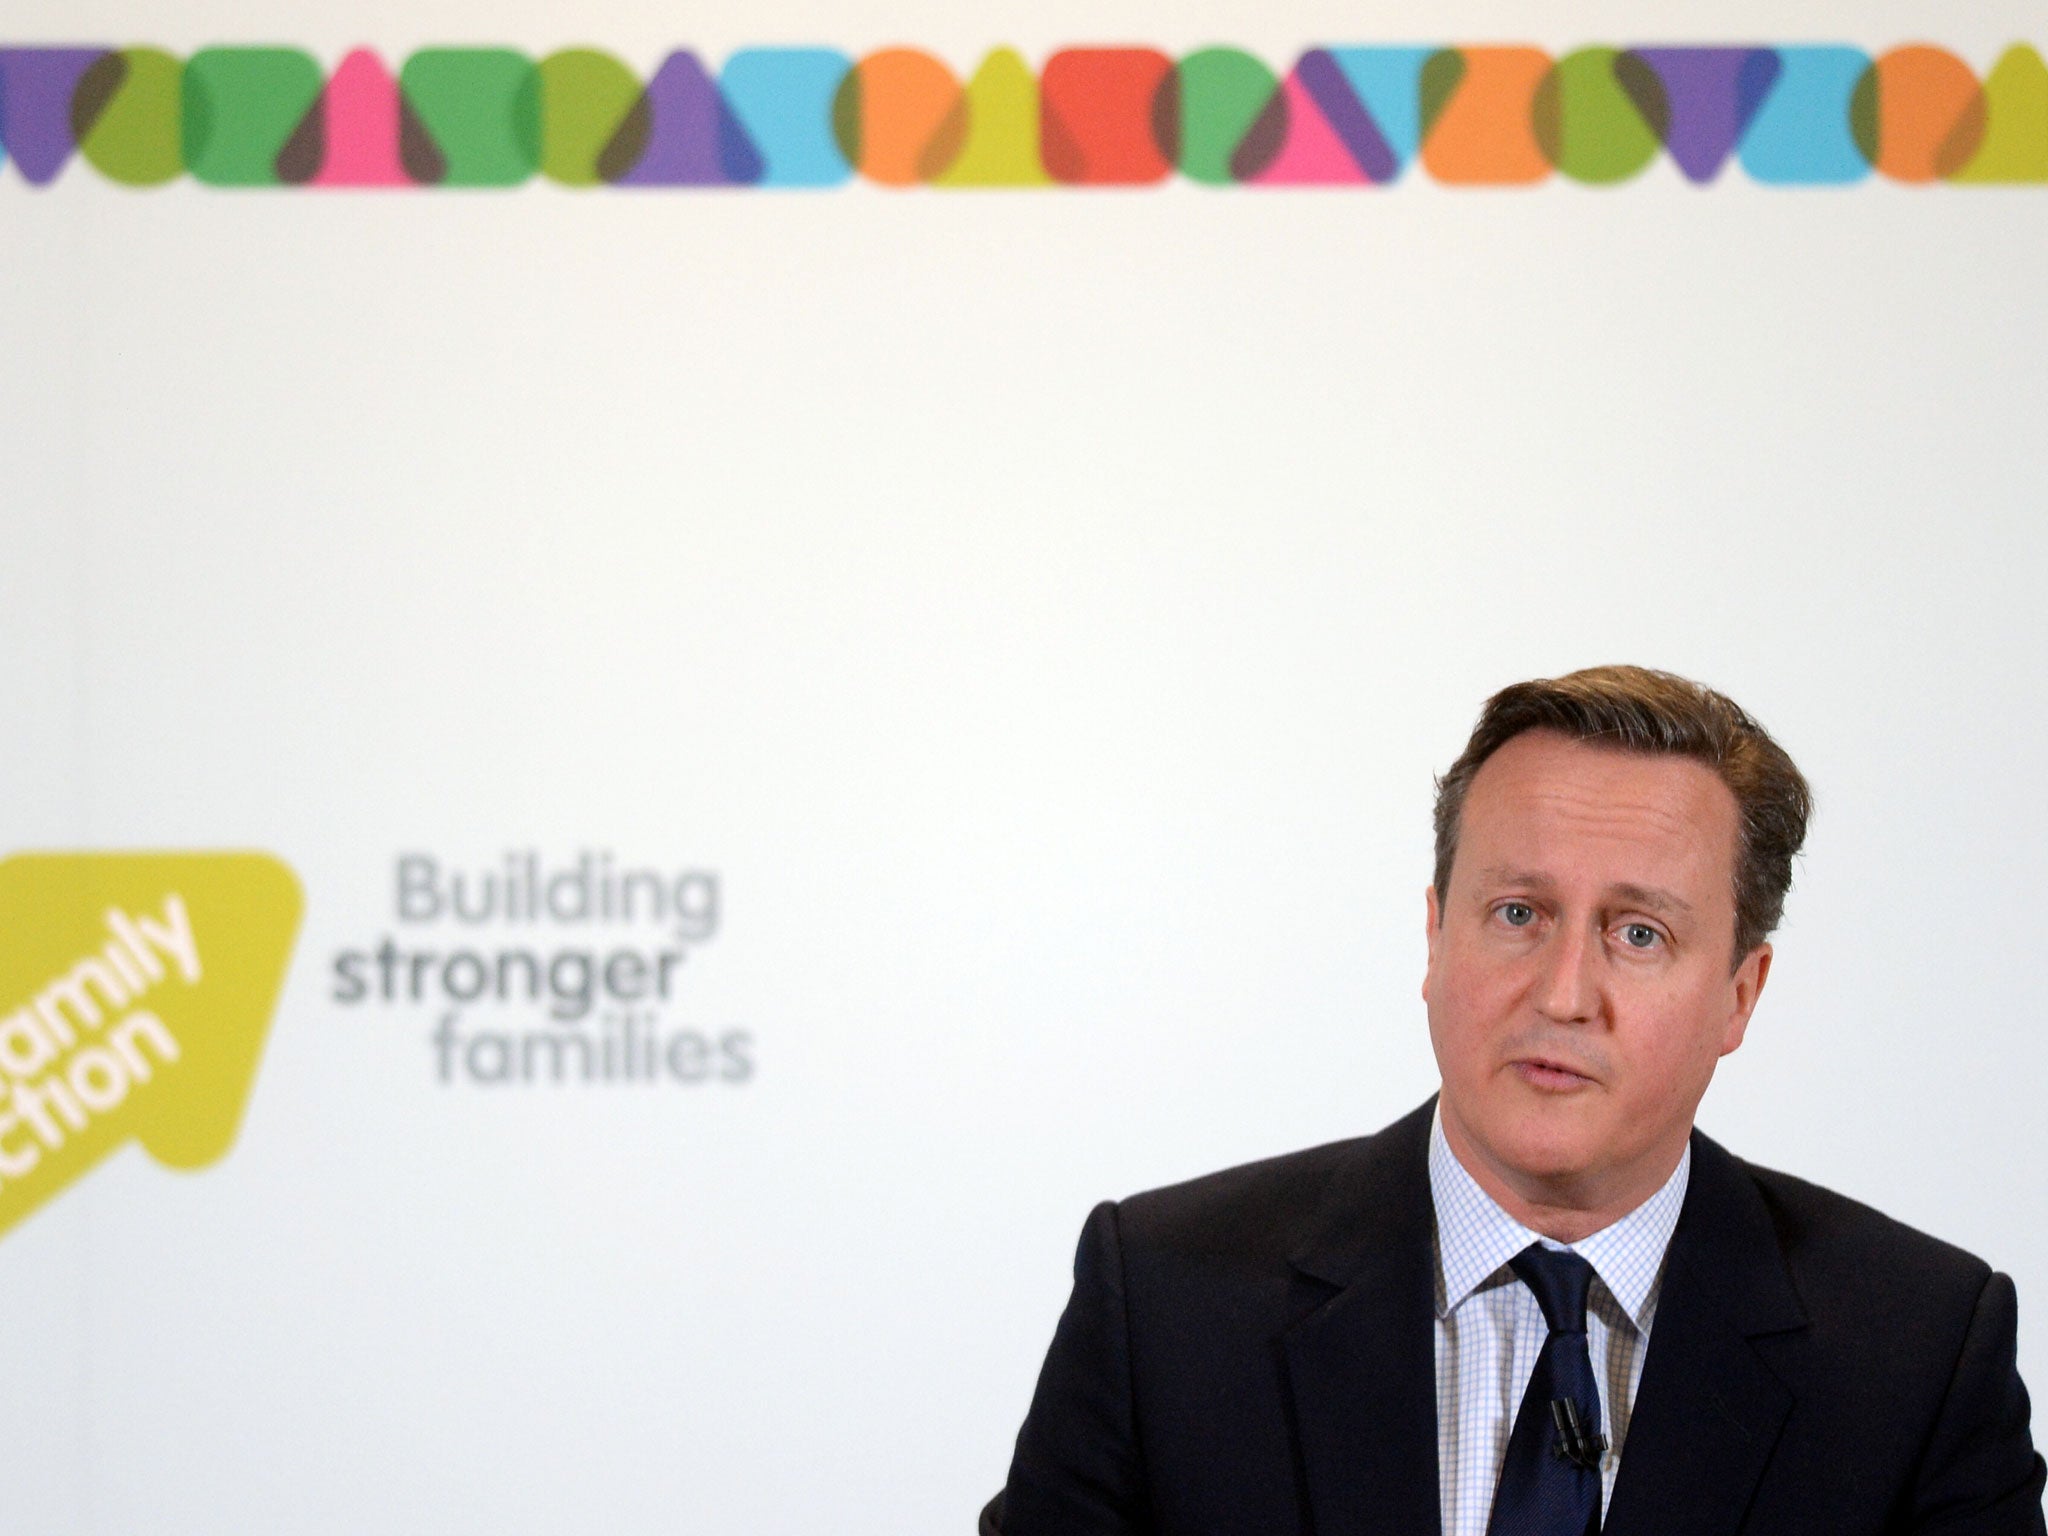 David Cameron was the first Prime Minister ever to have talked about teenage mental health (Getty)